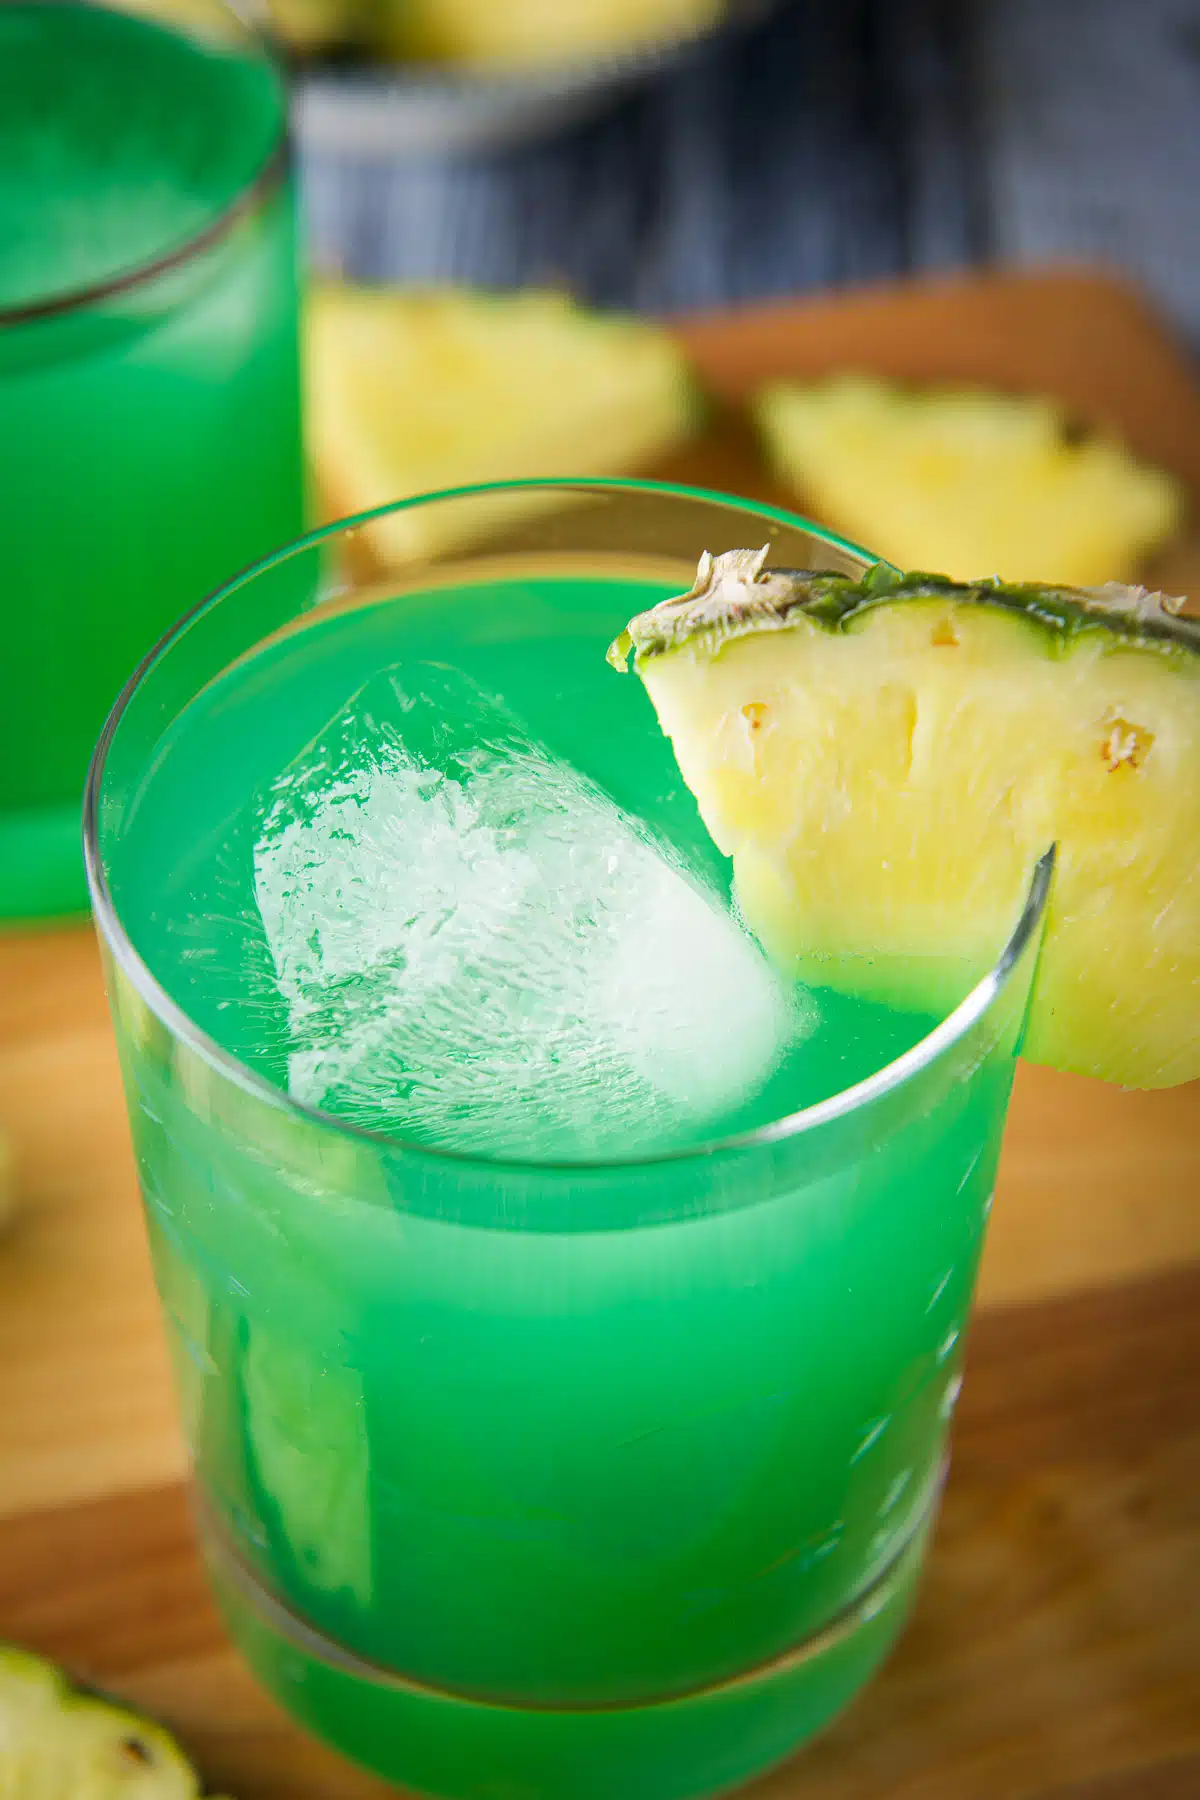 Close up of a glass of drunk leprechaun with a pineapple wedge on the rim. There is also another drink in the back with pineapple wedges